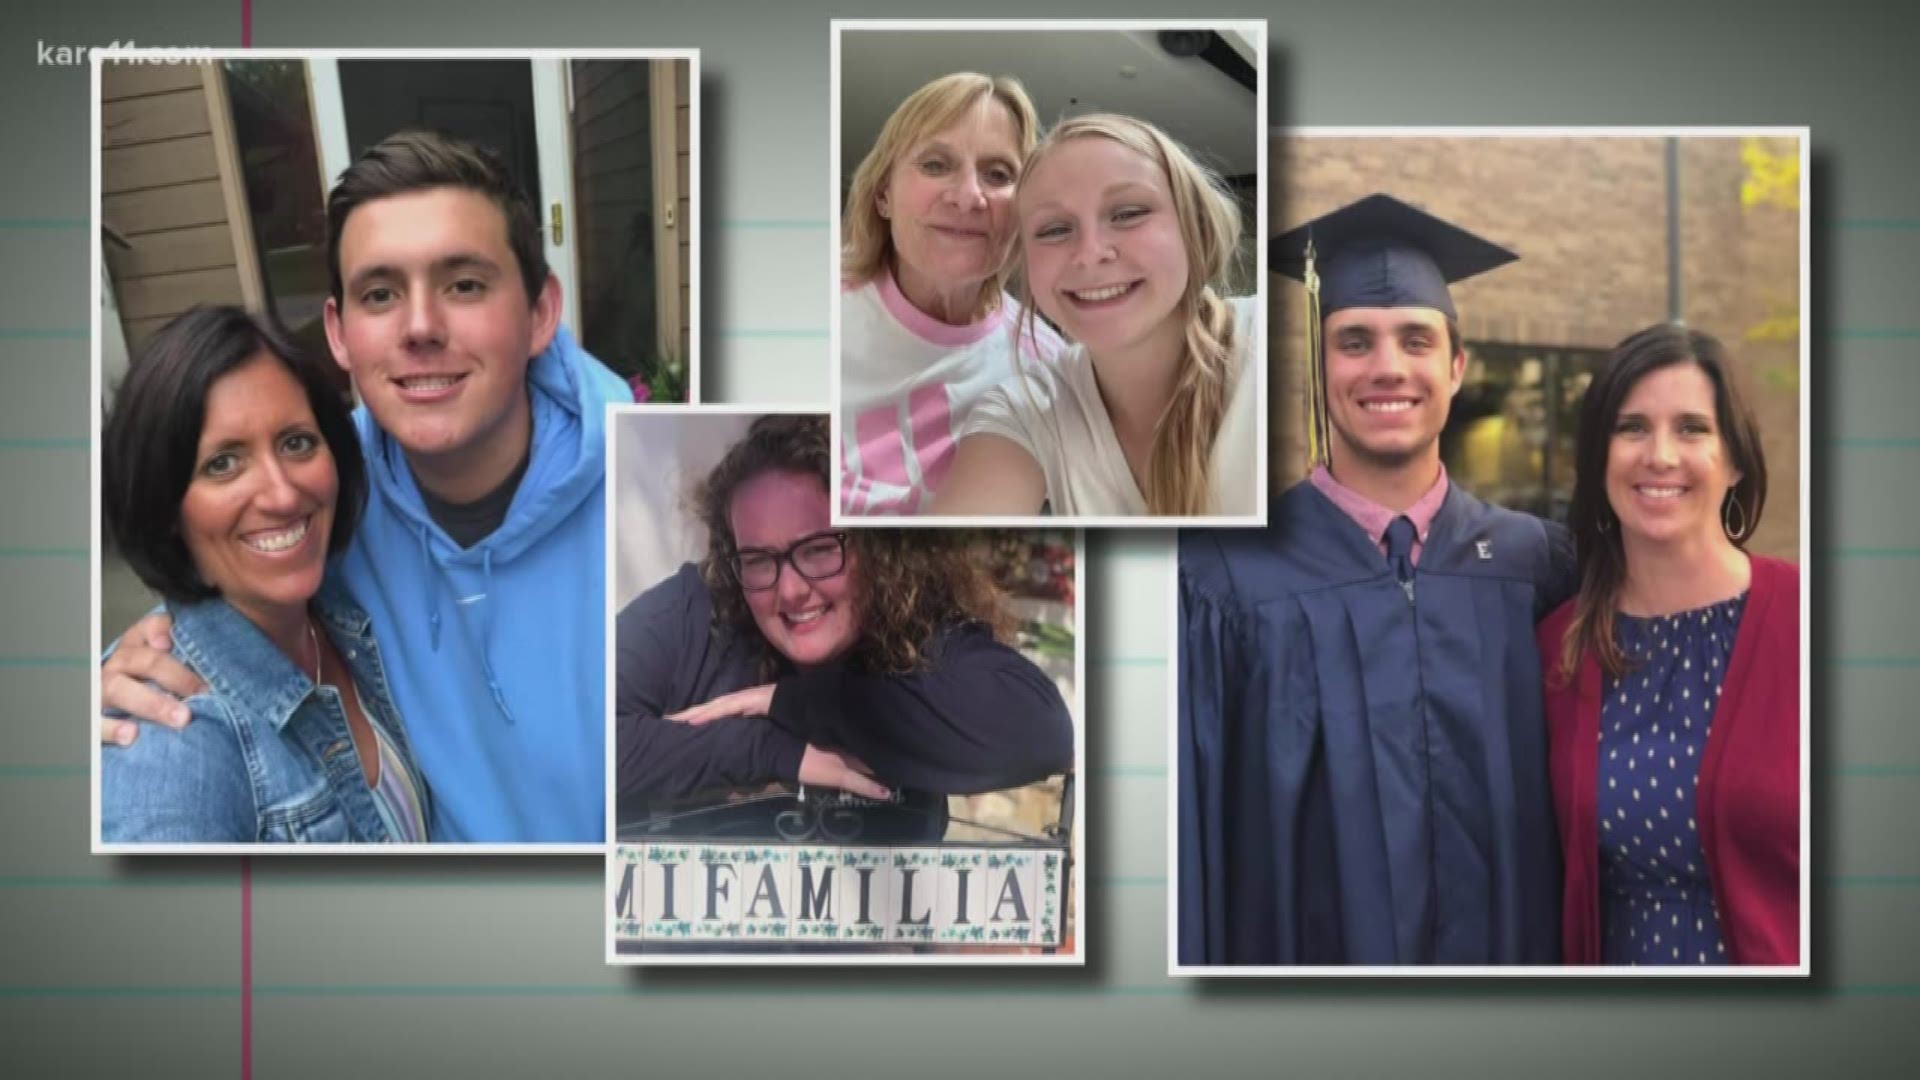 Tonight’s story is all about YOUR kids.
And YOUR advice to them, as they leave for college, or the military, this fall.